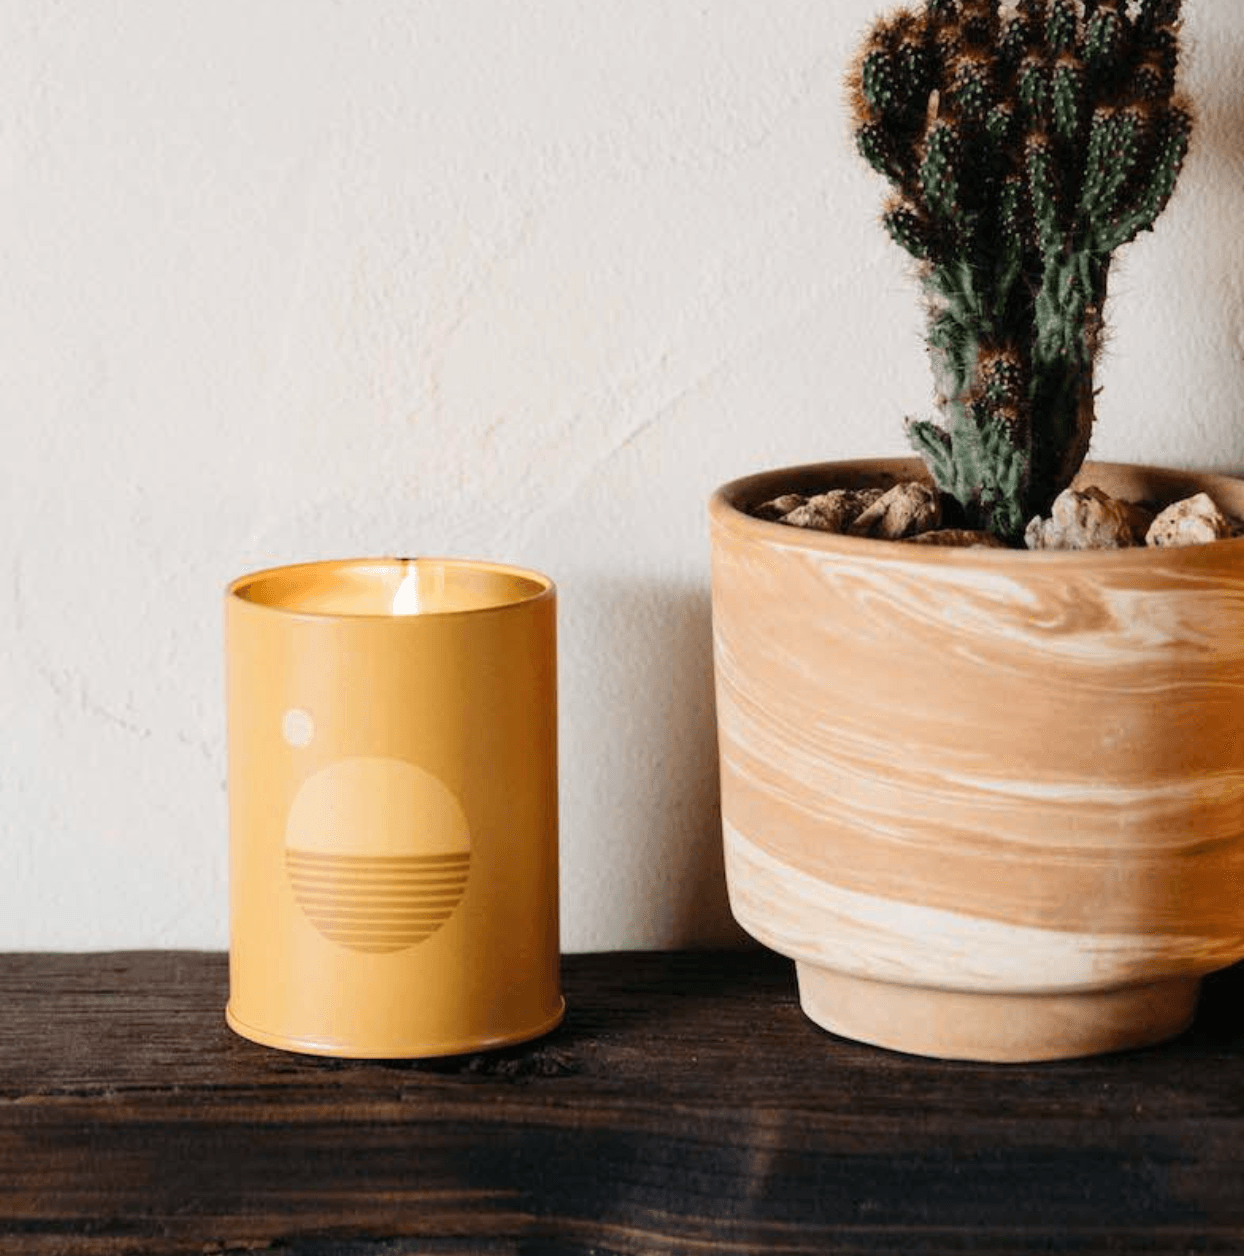 Sunset Candle in Golden Hour by PF Candle Co. - Haven